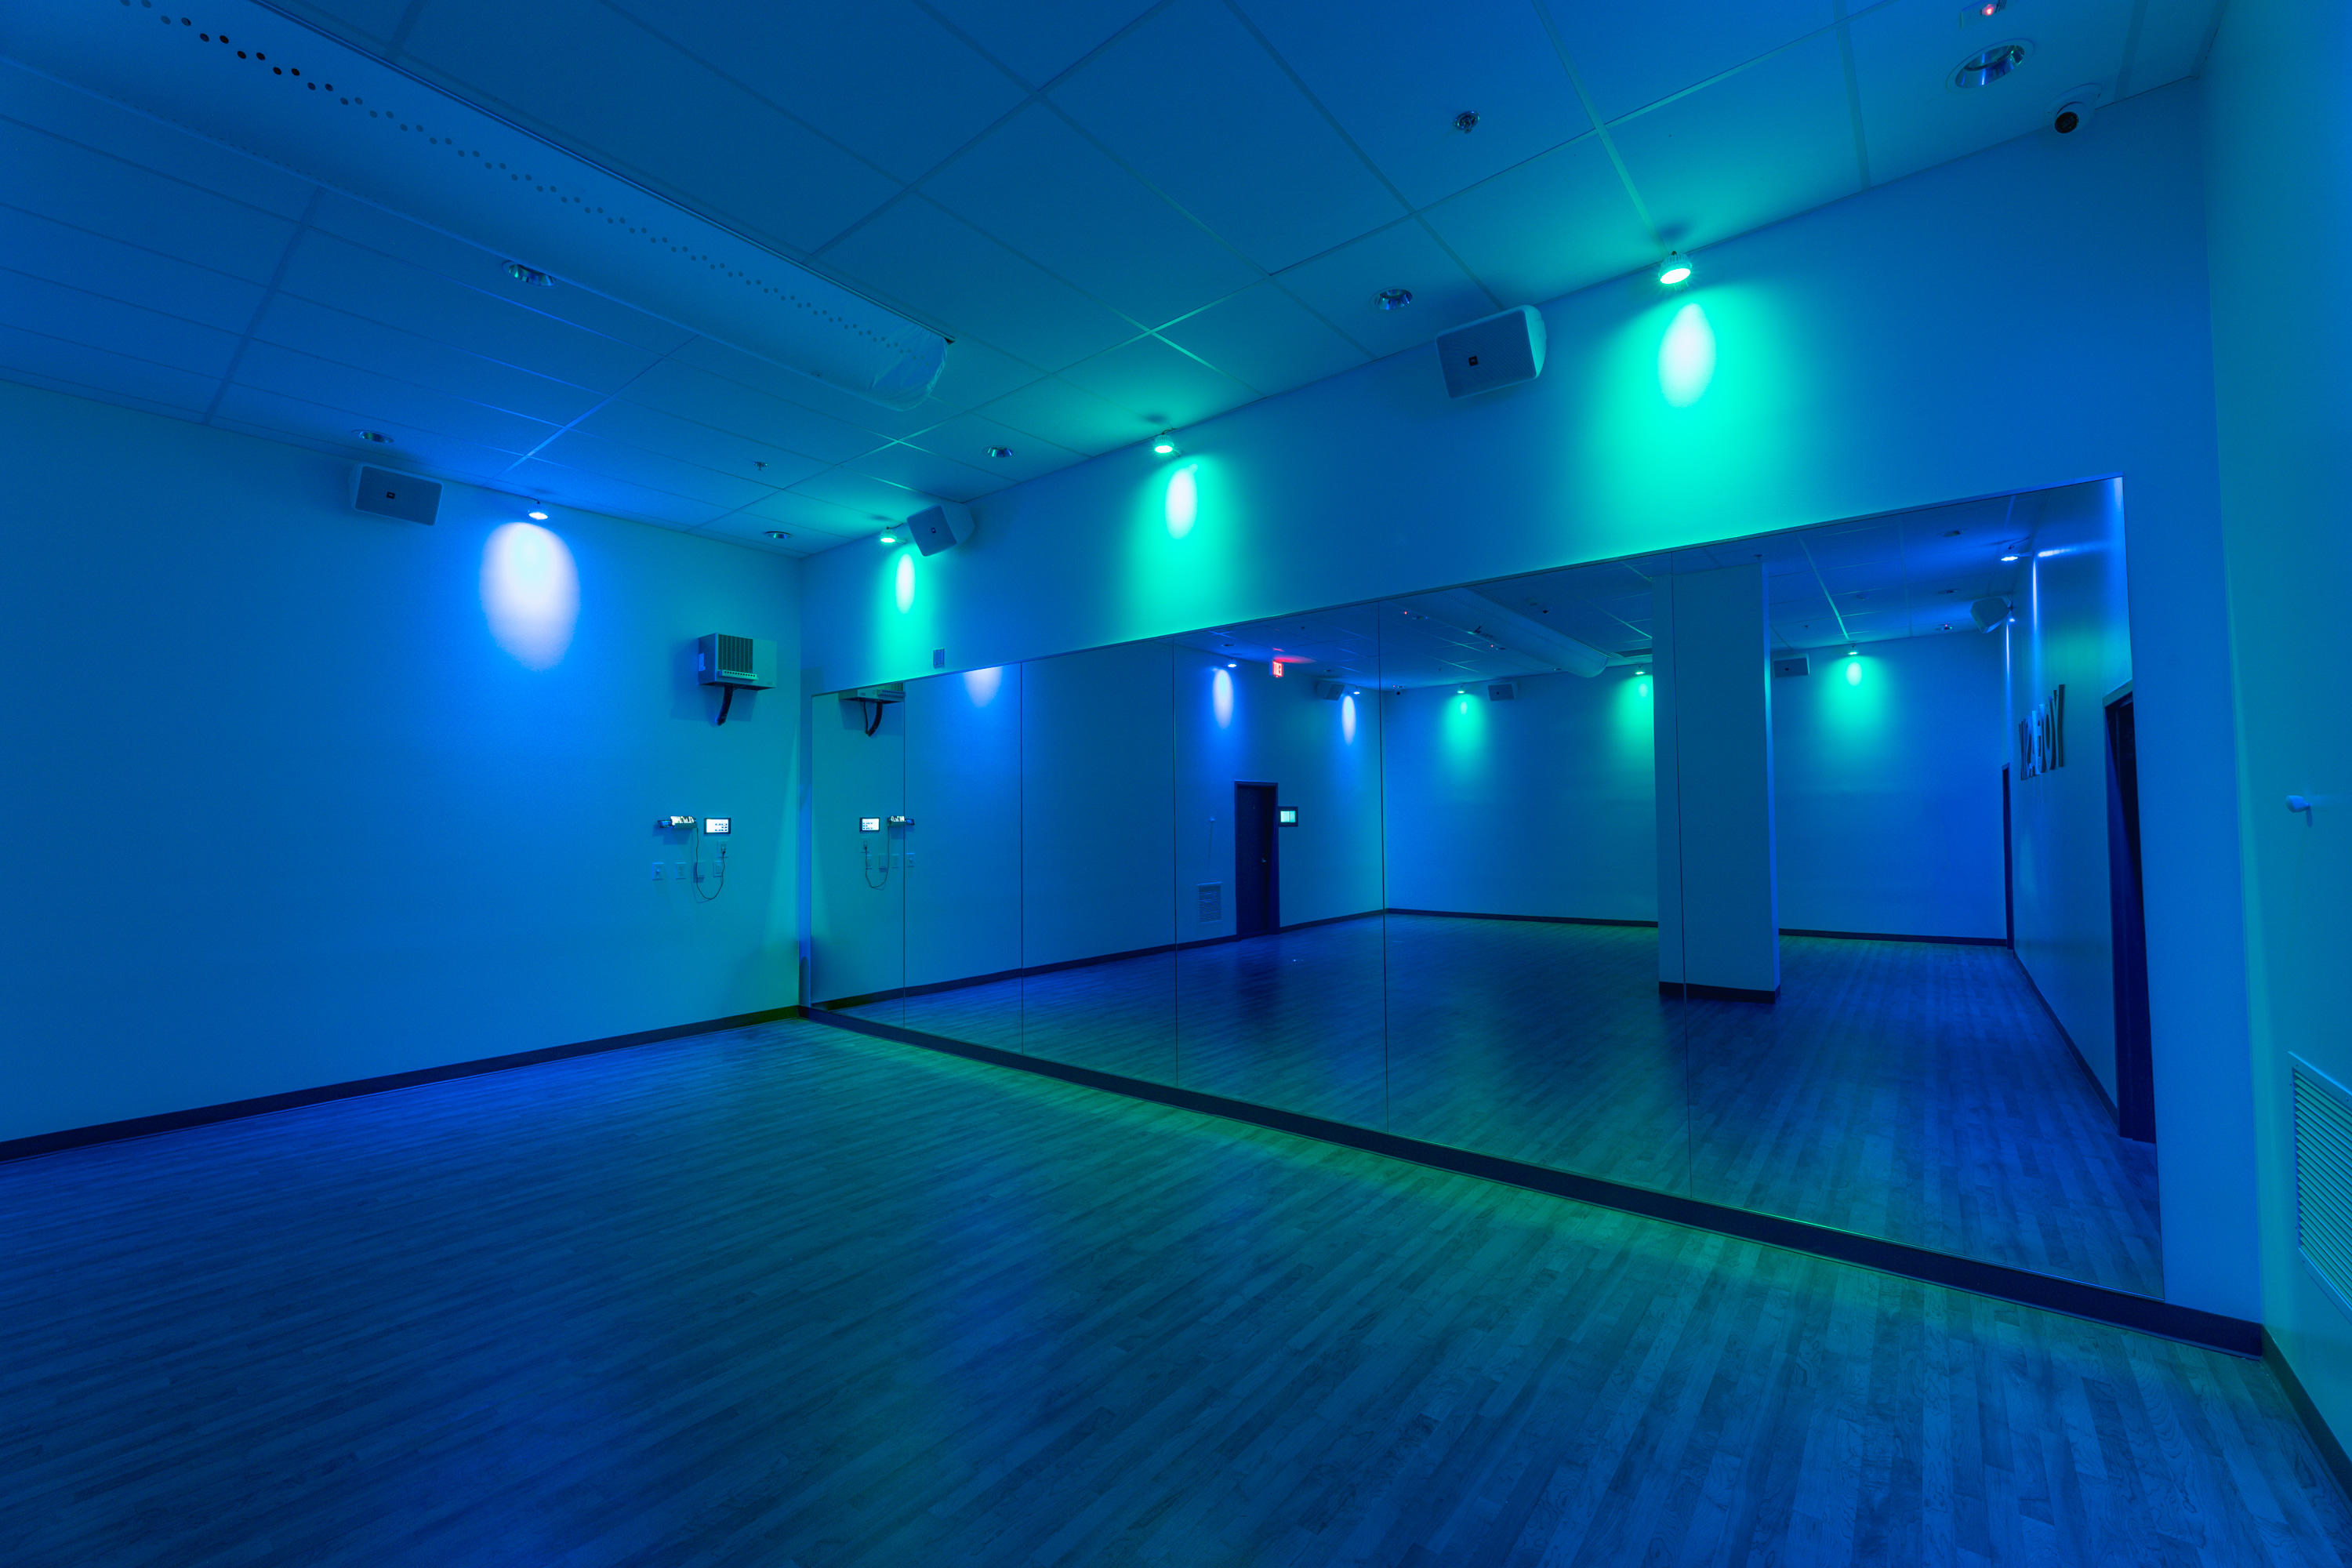 Practice Room Soothing Blue Light